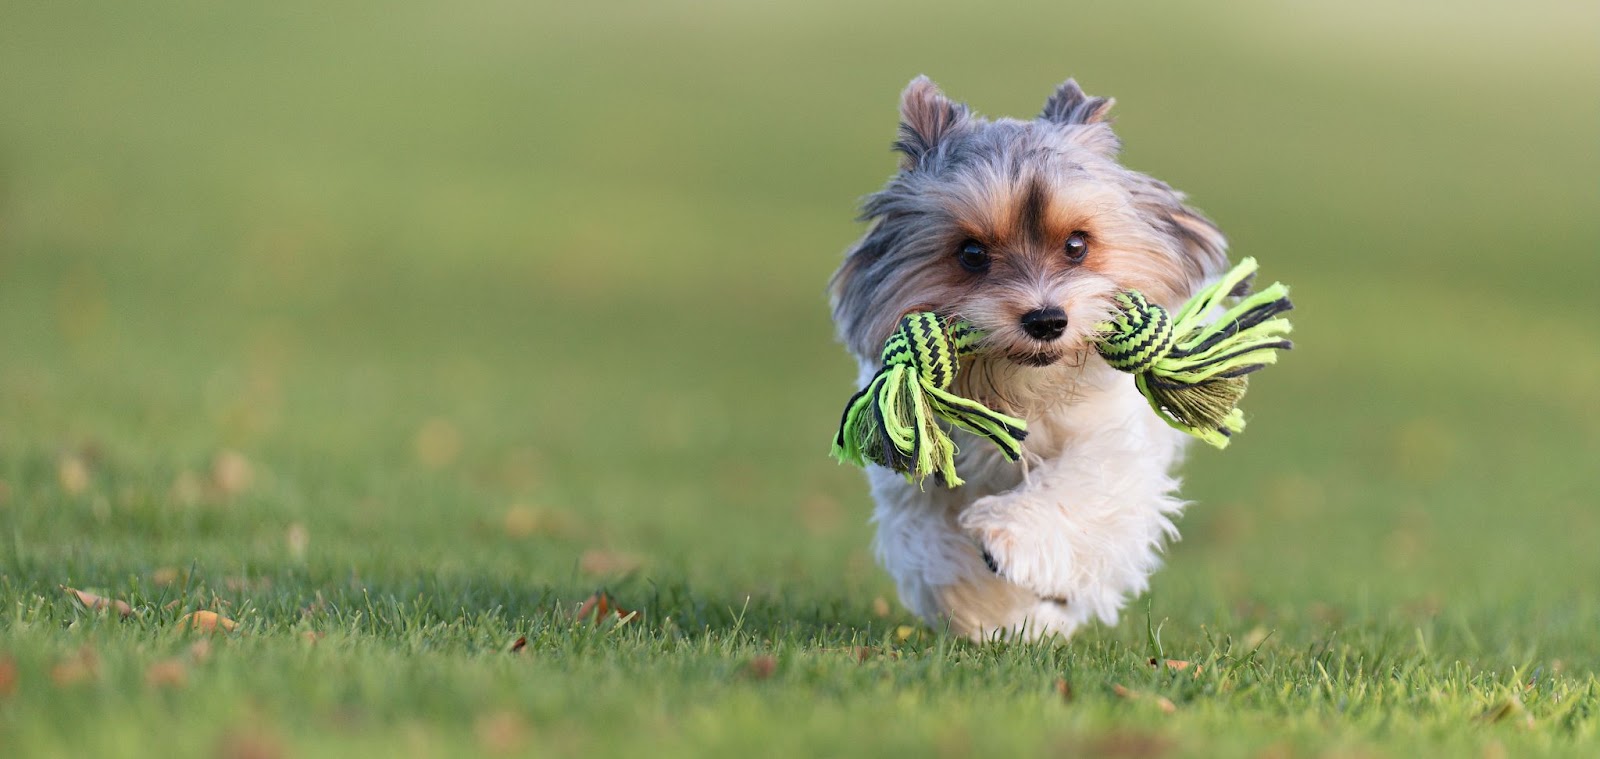 running puppy with toy on its mouth